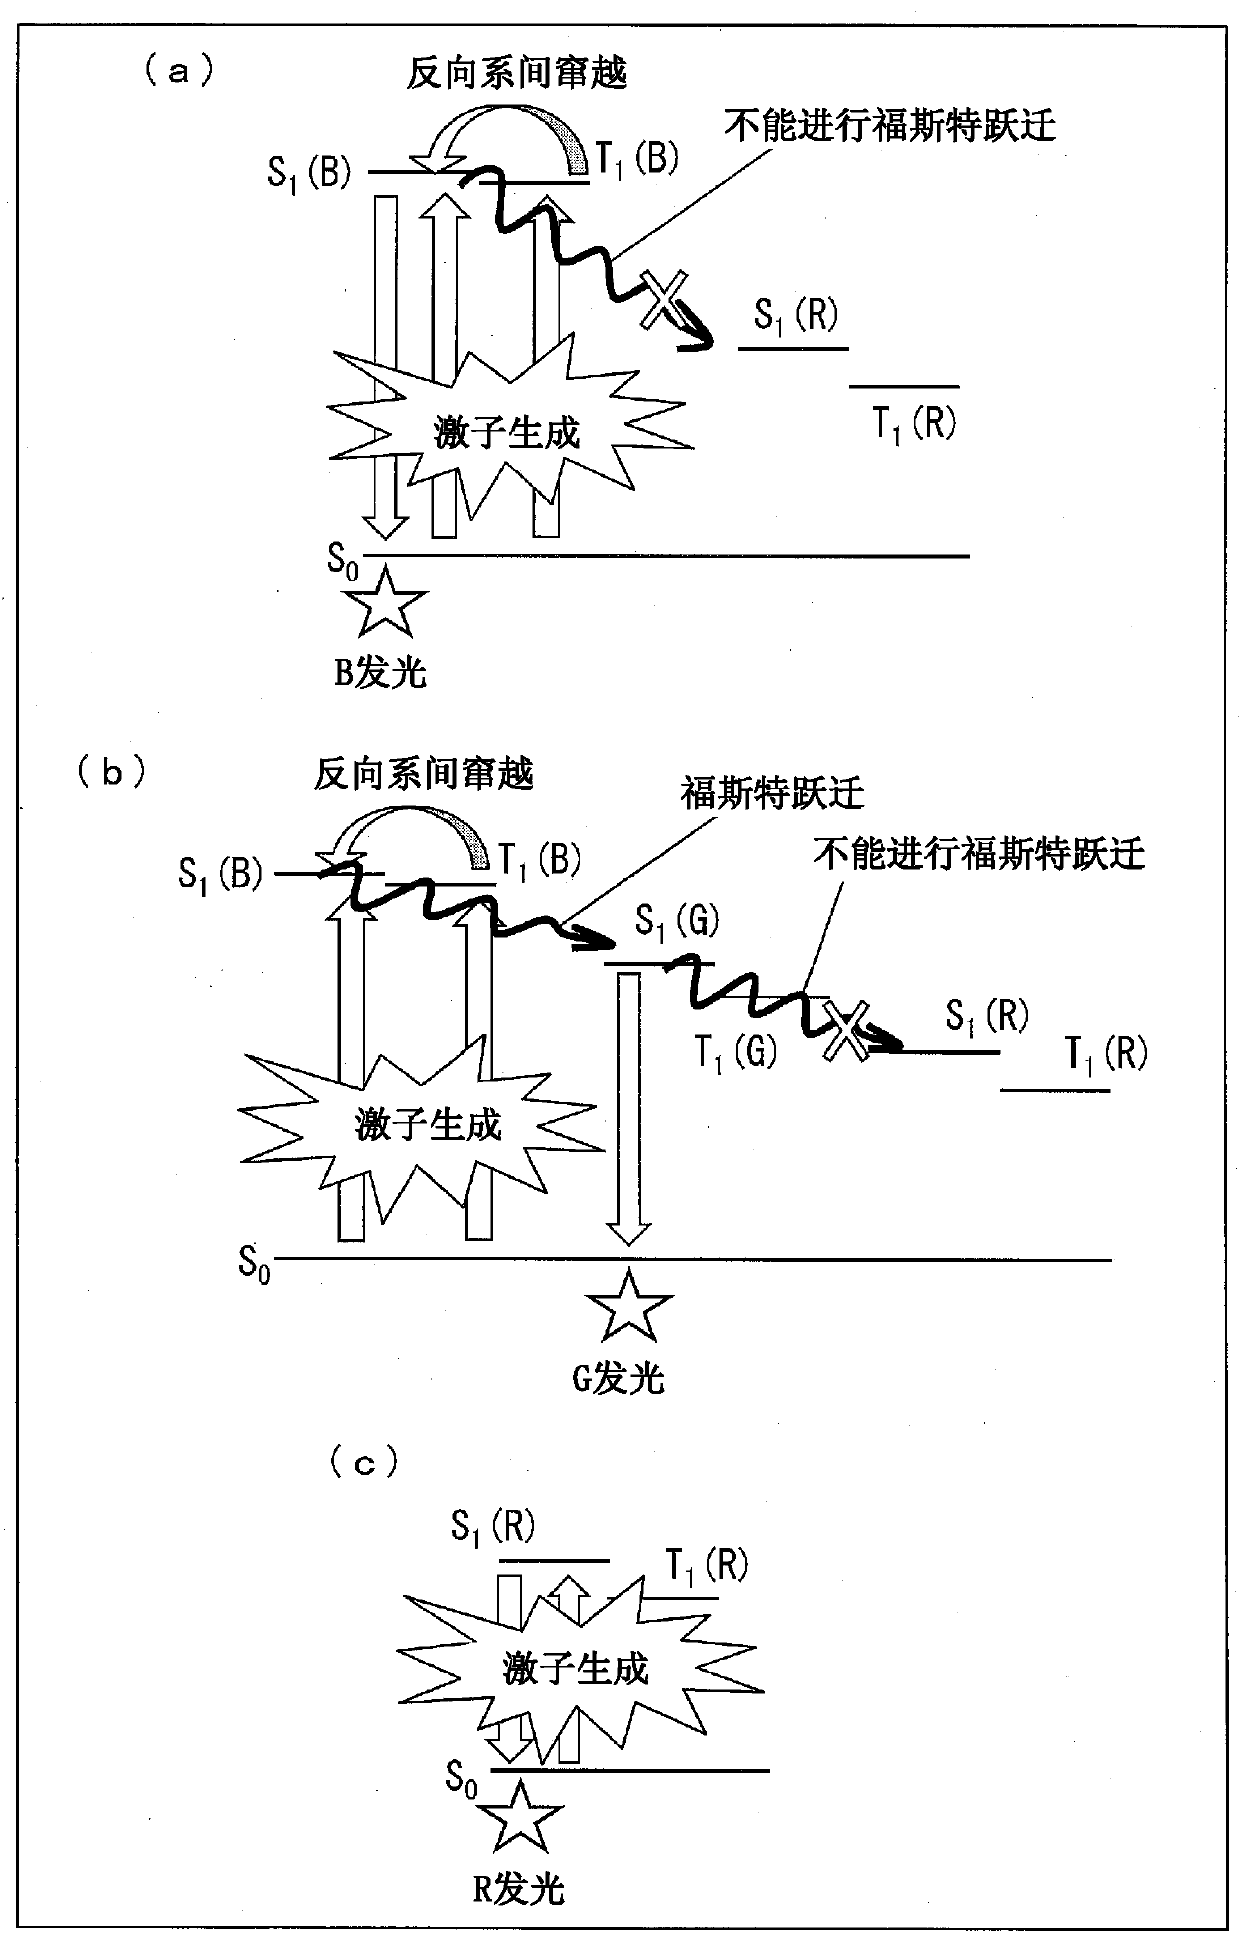 Display apparatus and method for manufacturing same